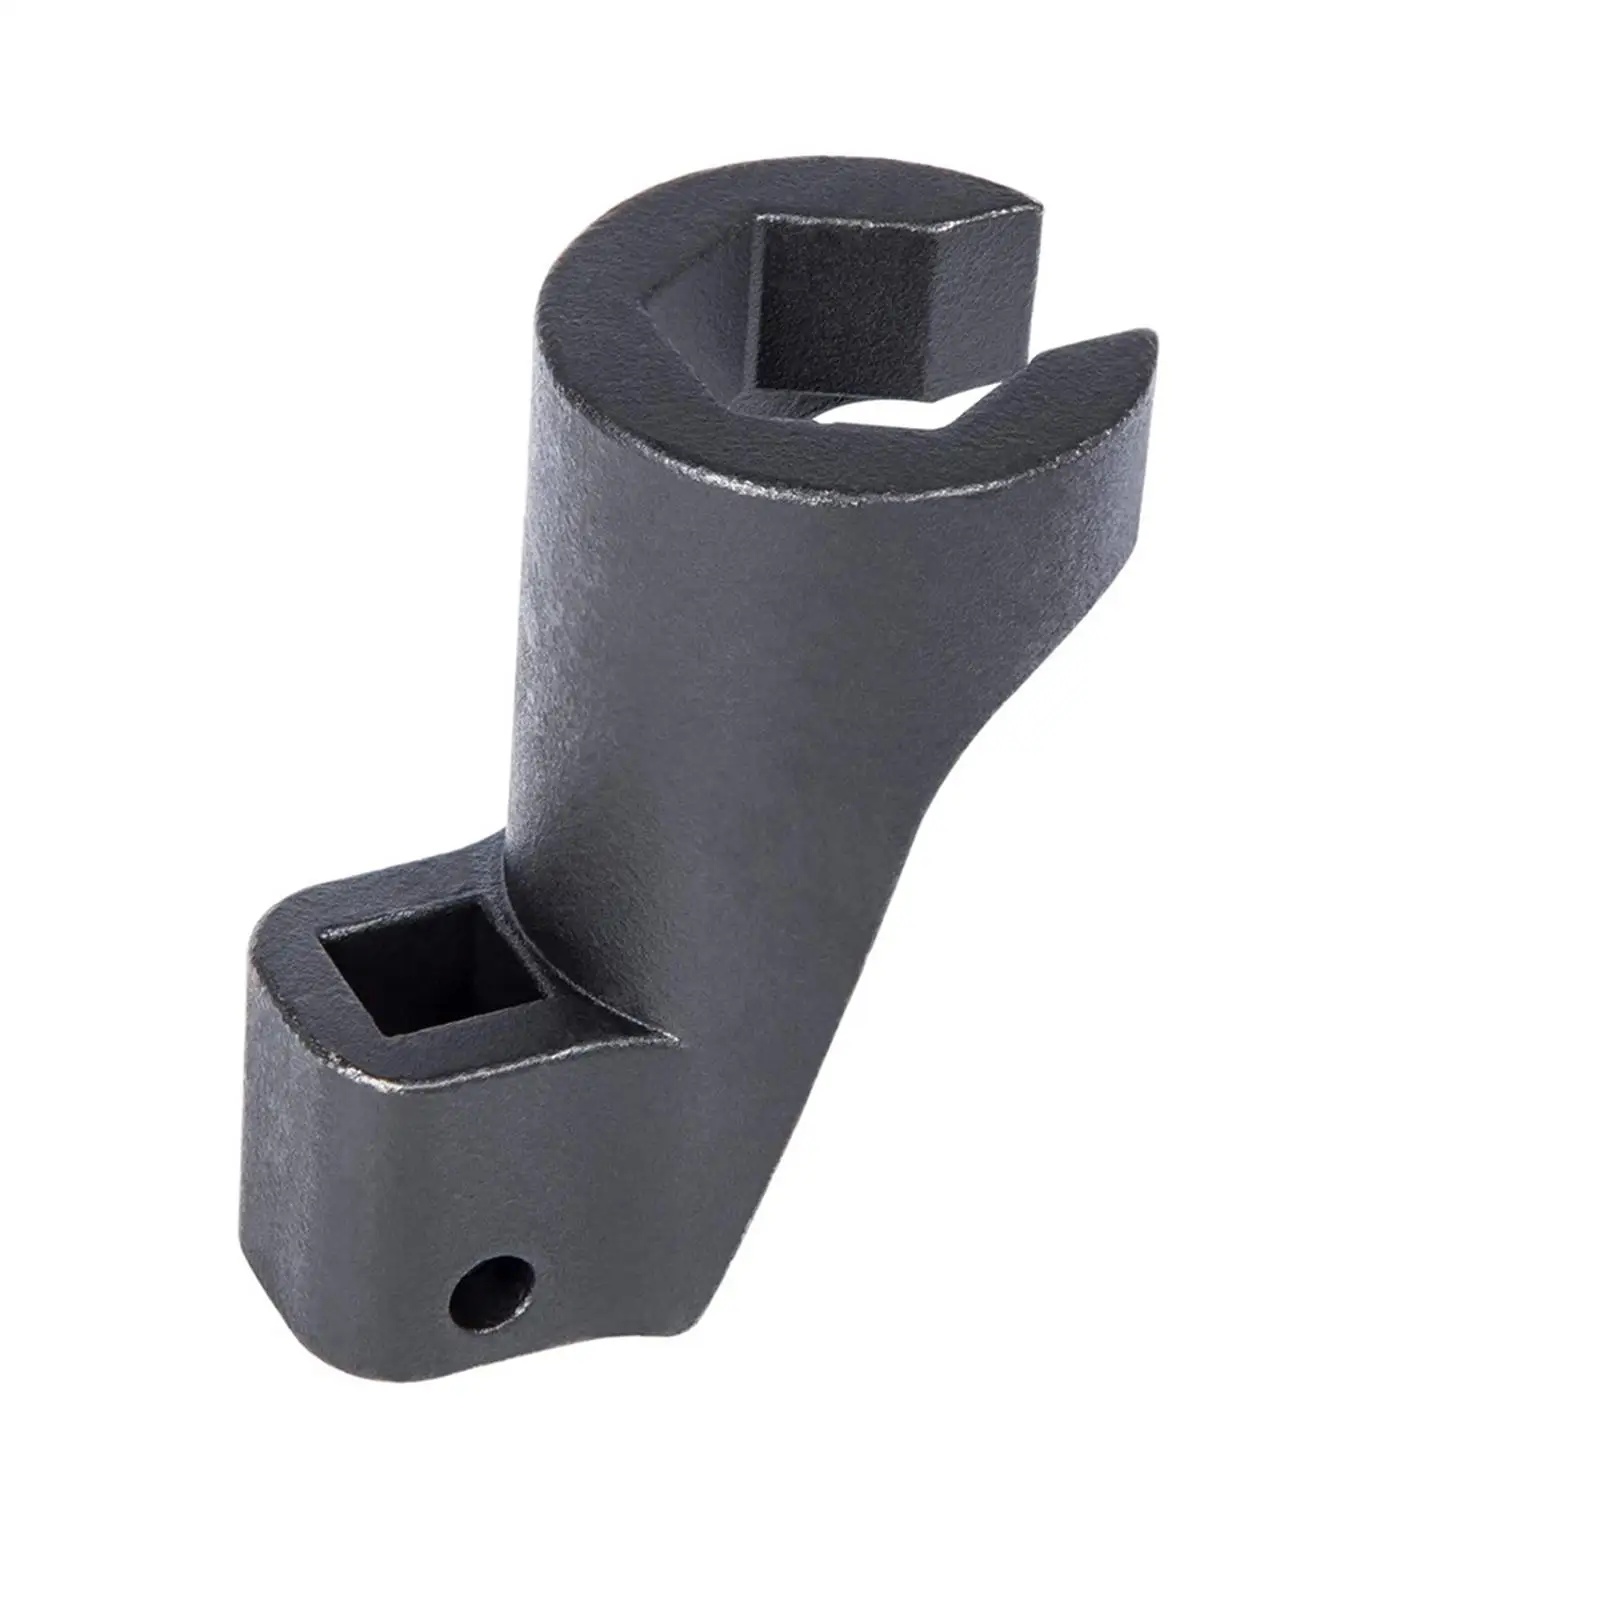 19mm High Pressure Fuel Line Socket Steel Direct Replaces Stable Repair Wrench Professional Attachments Durable Sleeve Tool